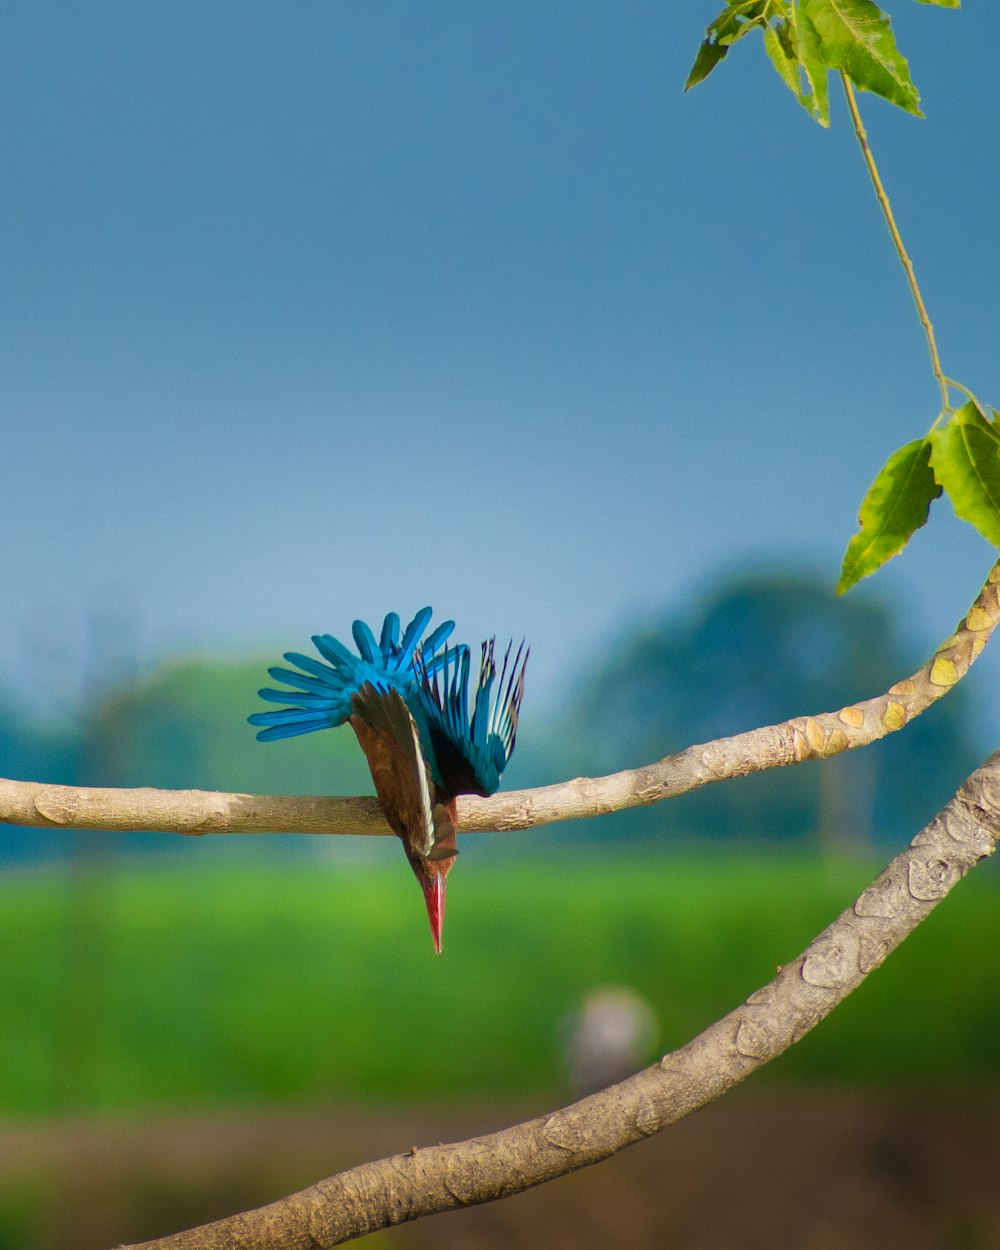 a blue bird with a long tail sitting on a branch